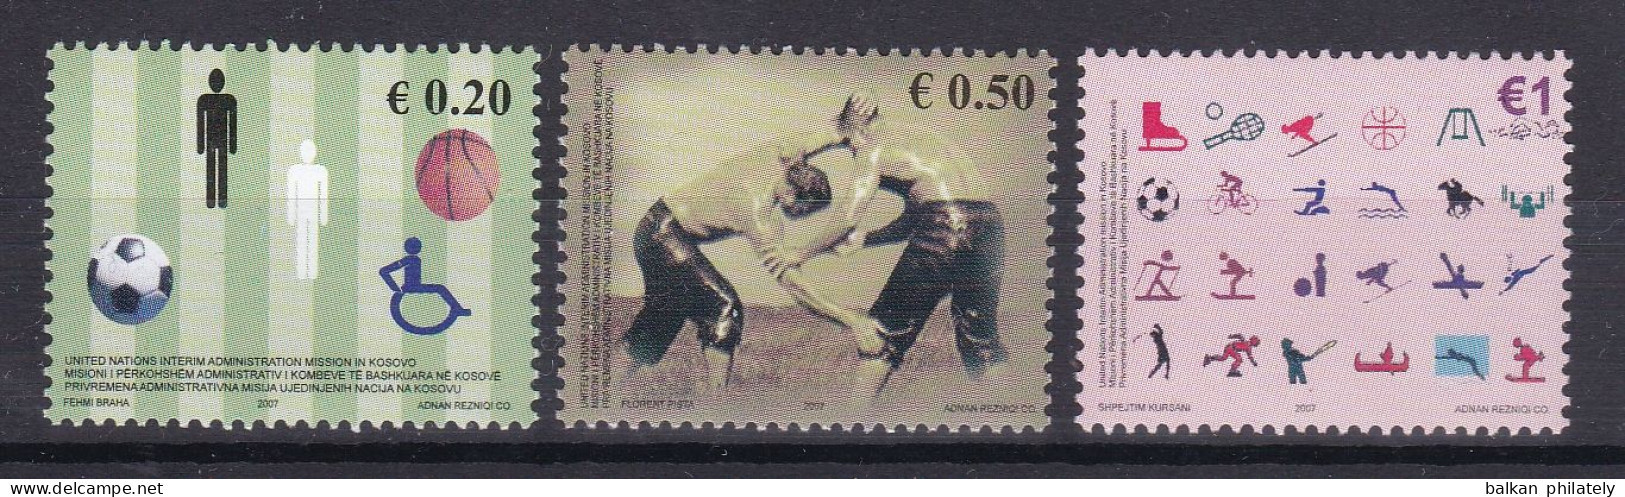 Kosovo 2007 Sports Basketball Football Disabled Persons Wrestling Tennis Cycling Equestrian UNMIK UN United Nations MNH - Ungebraucht